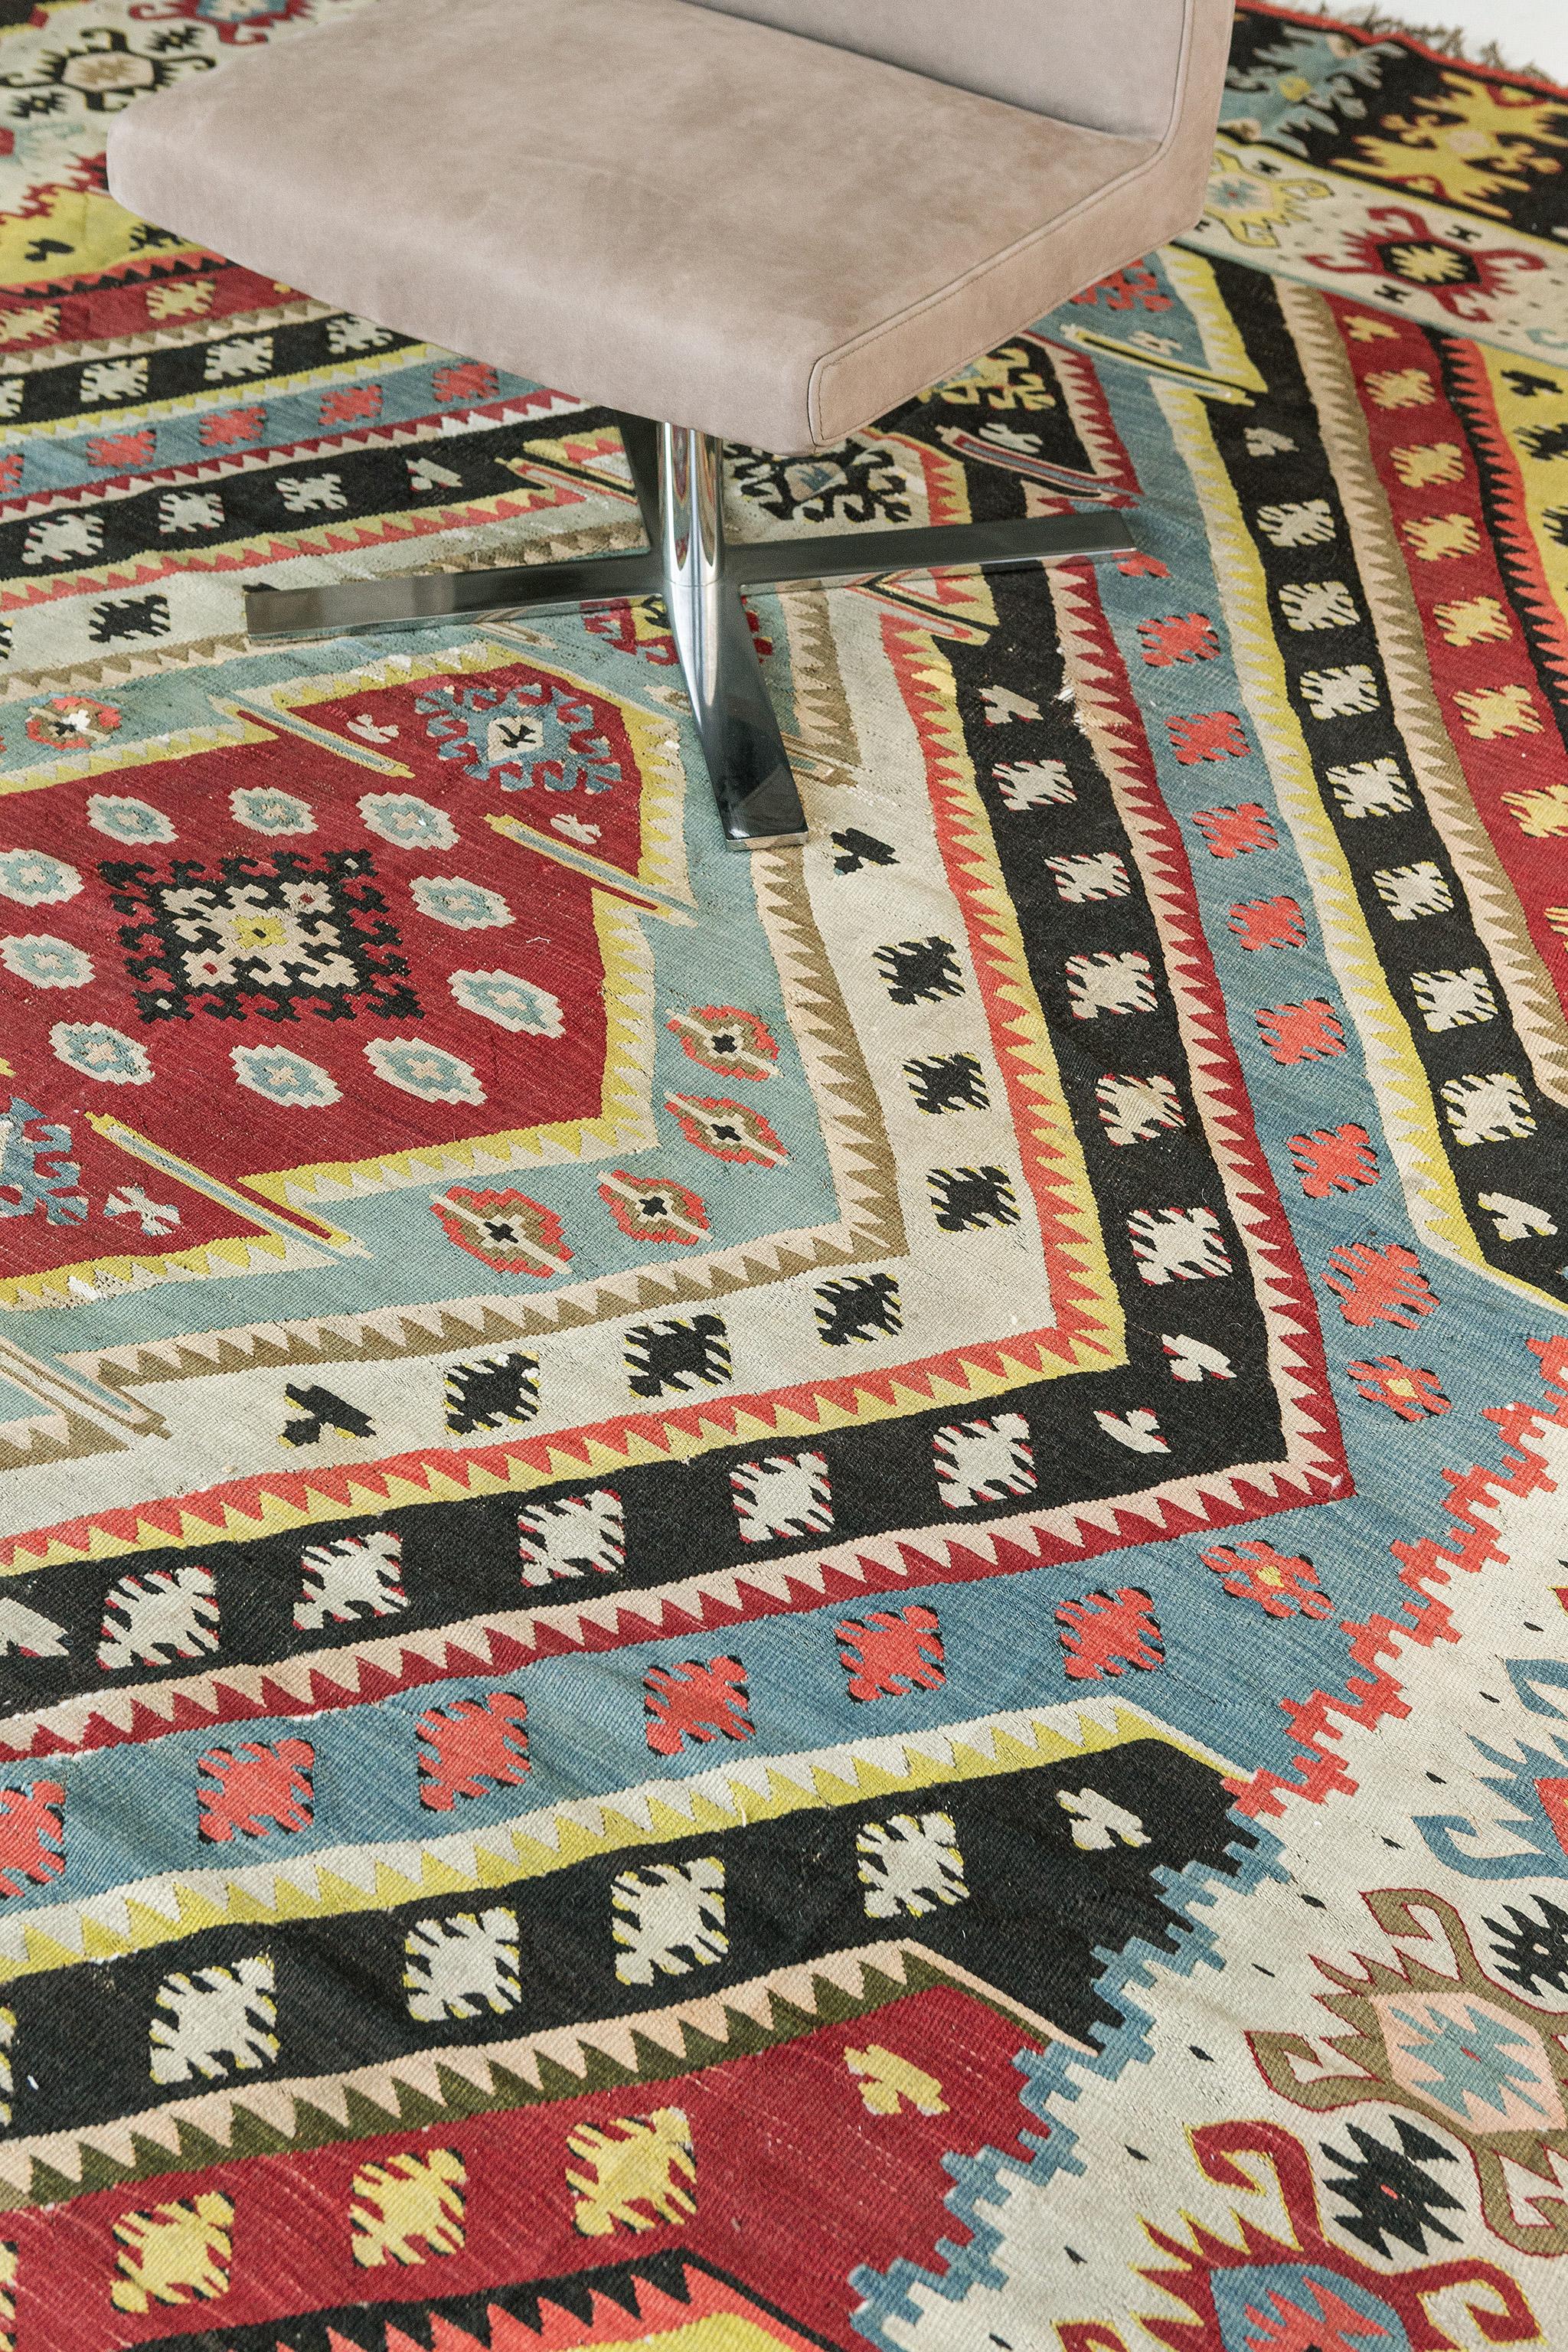 A vibrant and extraordinary vintage Turkish Anatolian rug features Tribal designs that are coupled into diamonds and are also surrounded by lively Anatolian borders. Vintage Turkish Anatolian rugs weave together dyes and colors, motifs, textures,